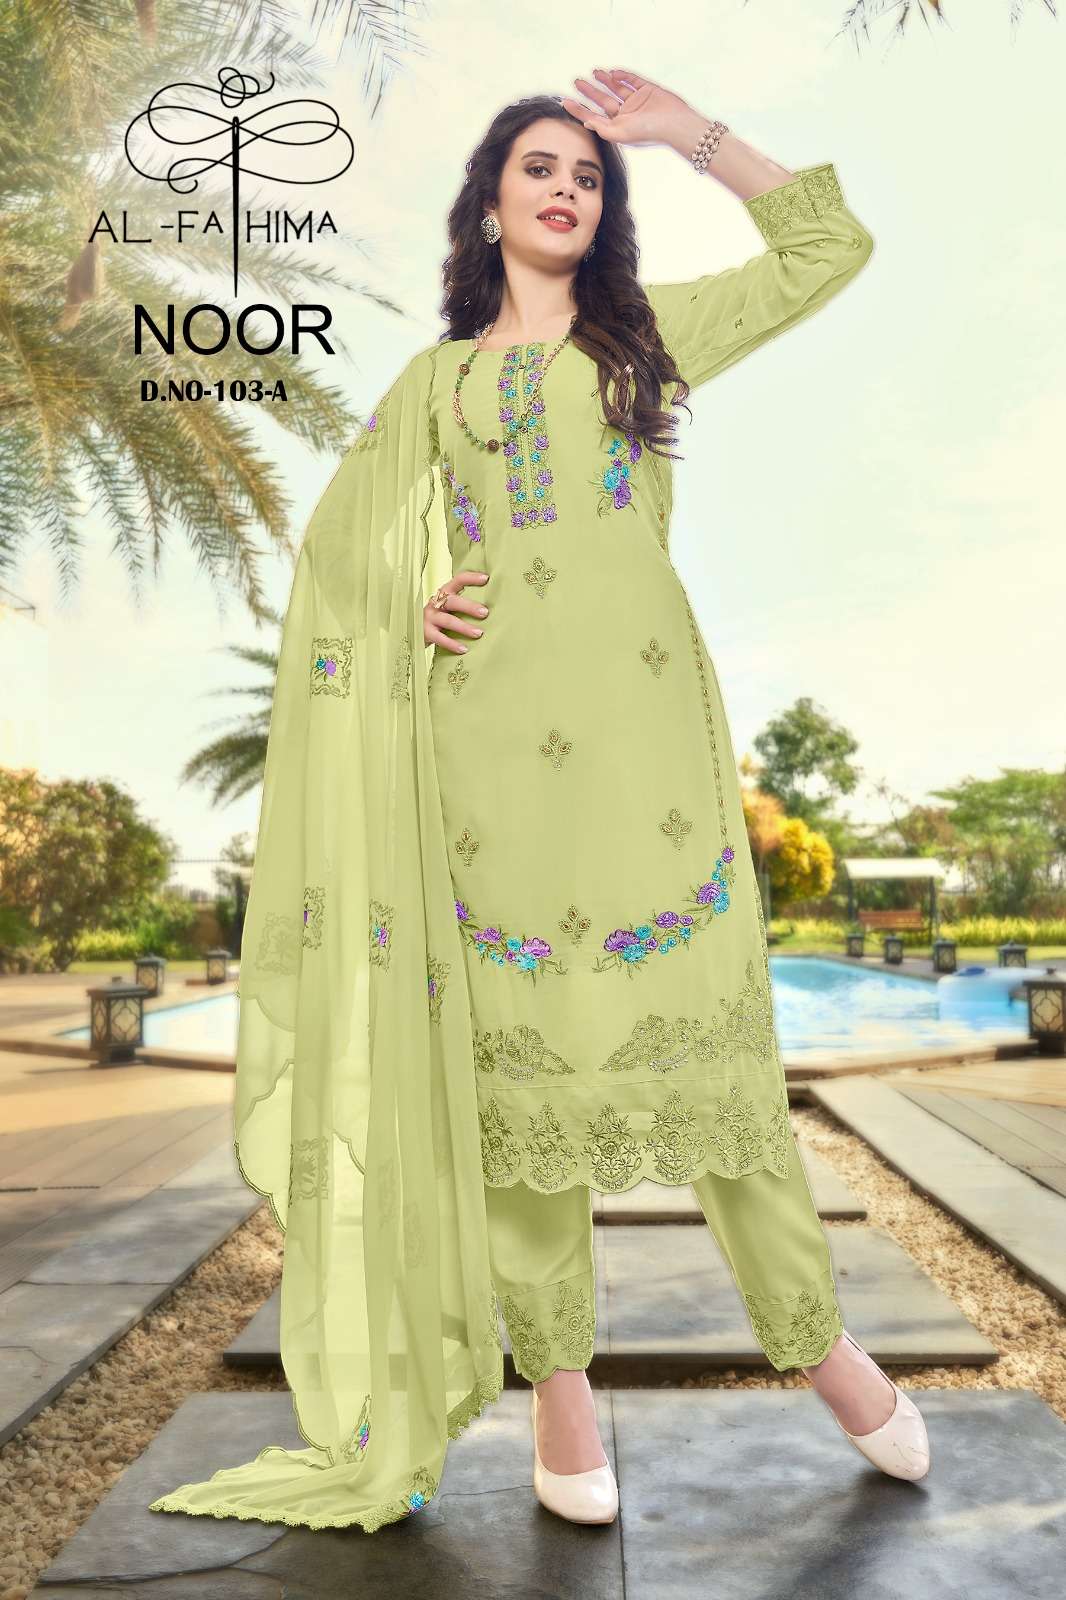 al fathima presents catalogue noor  design no 103 semi stitch pakistani suit  faux georgette inner heavy dull santoon bottom heavy dull santoon dupatta faux georgette with embroidery with moti work 